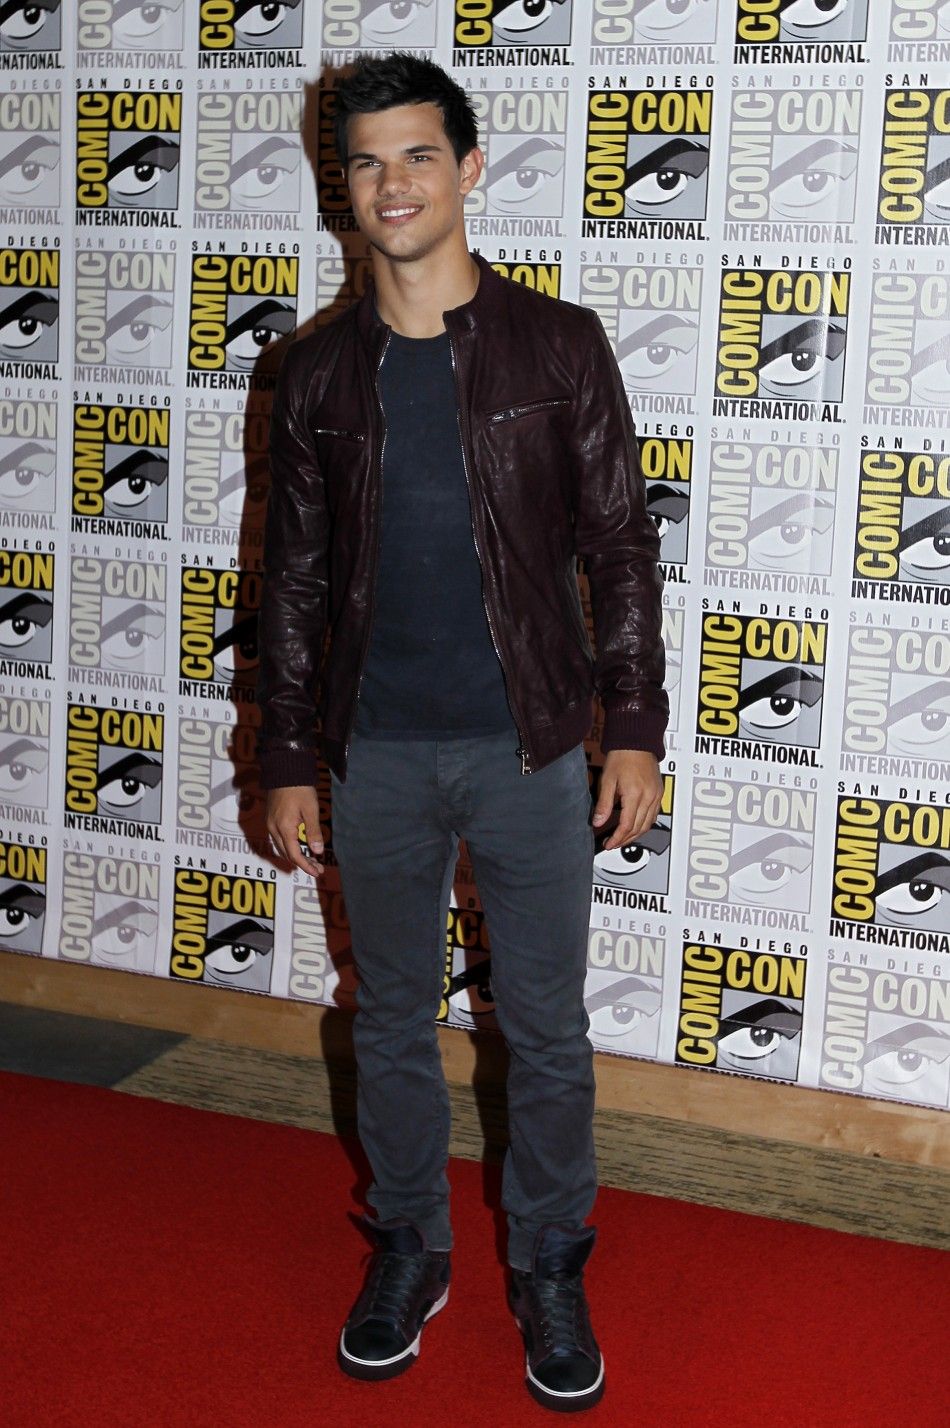 Taylor Lautner poses to promote quotBreaking Dawnquot from the Twilight Saga at Comic Con in San Diego